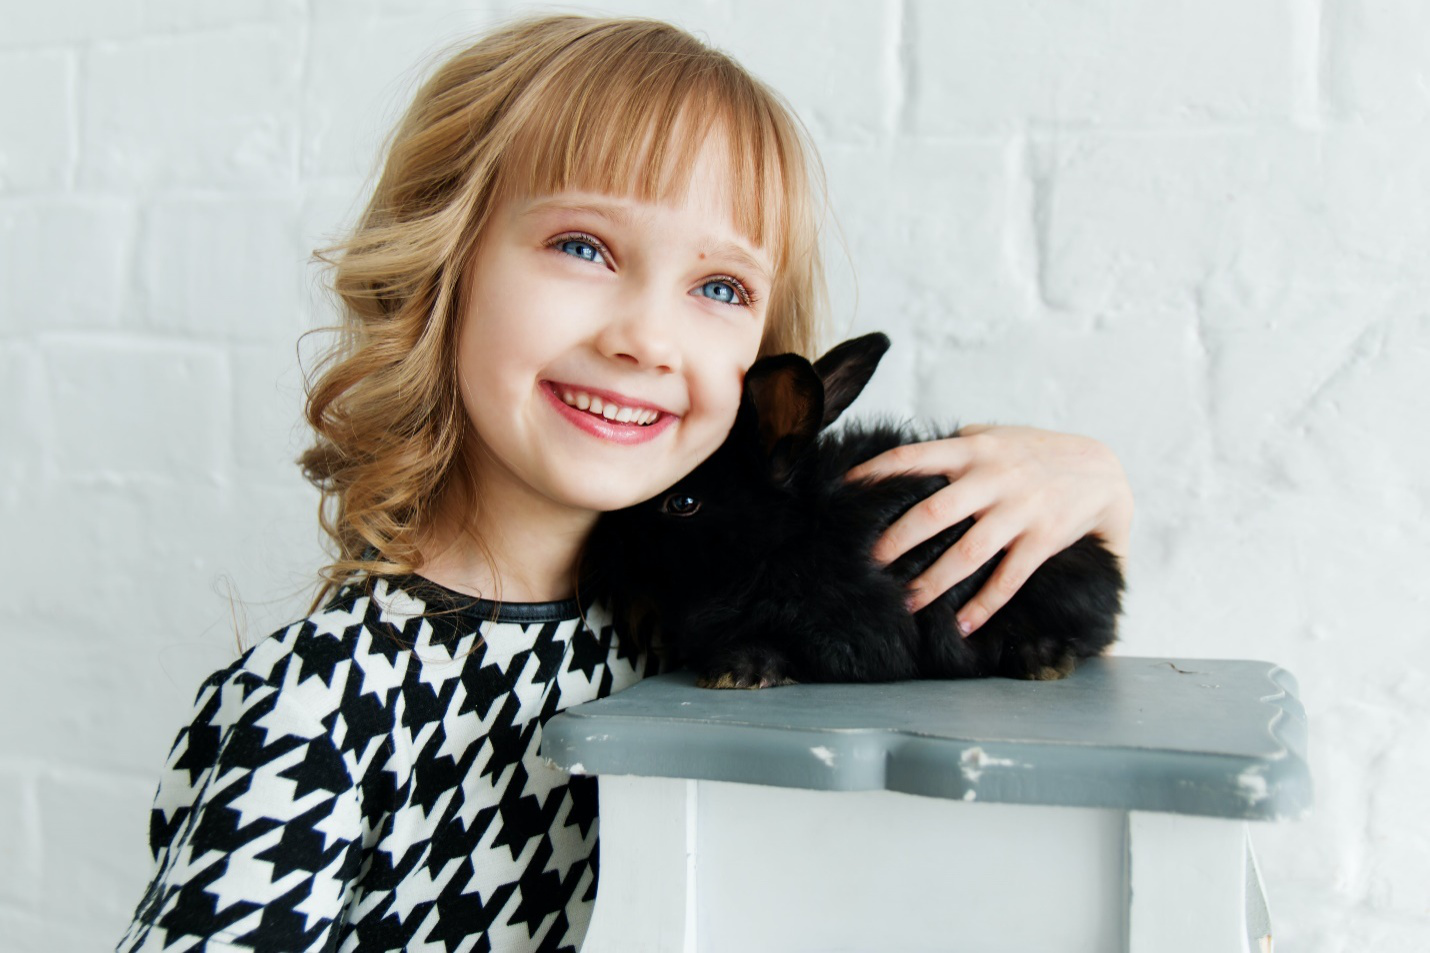  Little girl smiling and hugging a rabbit